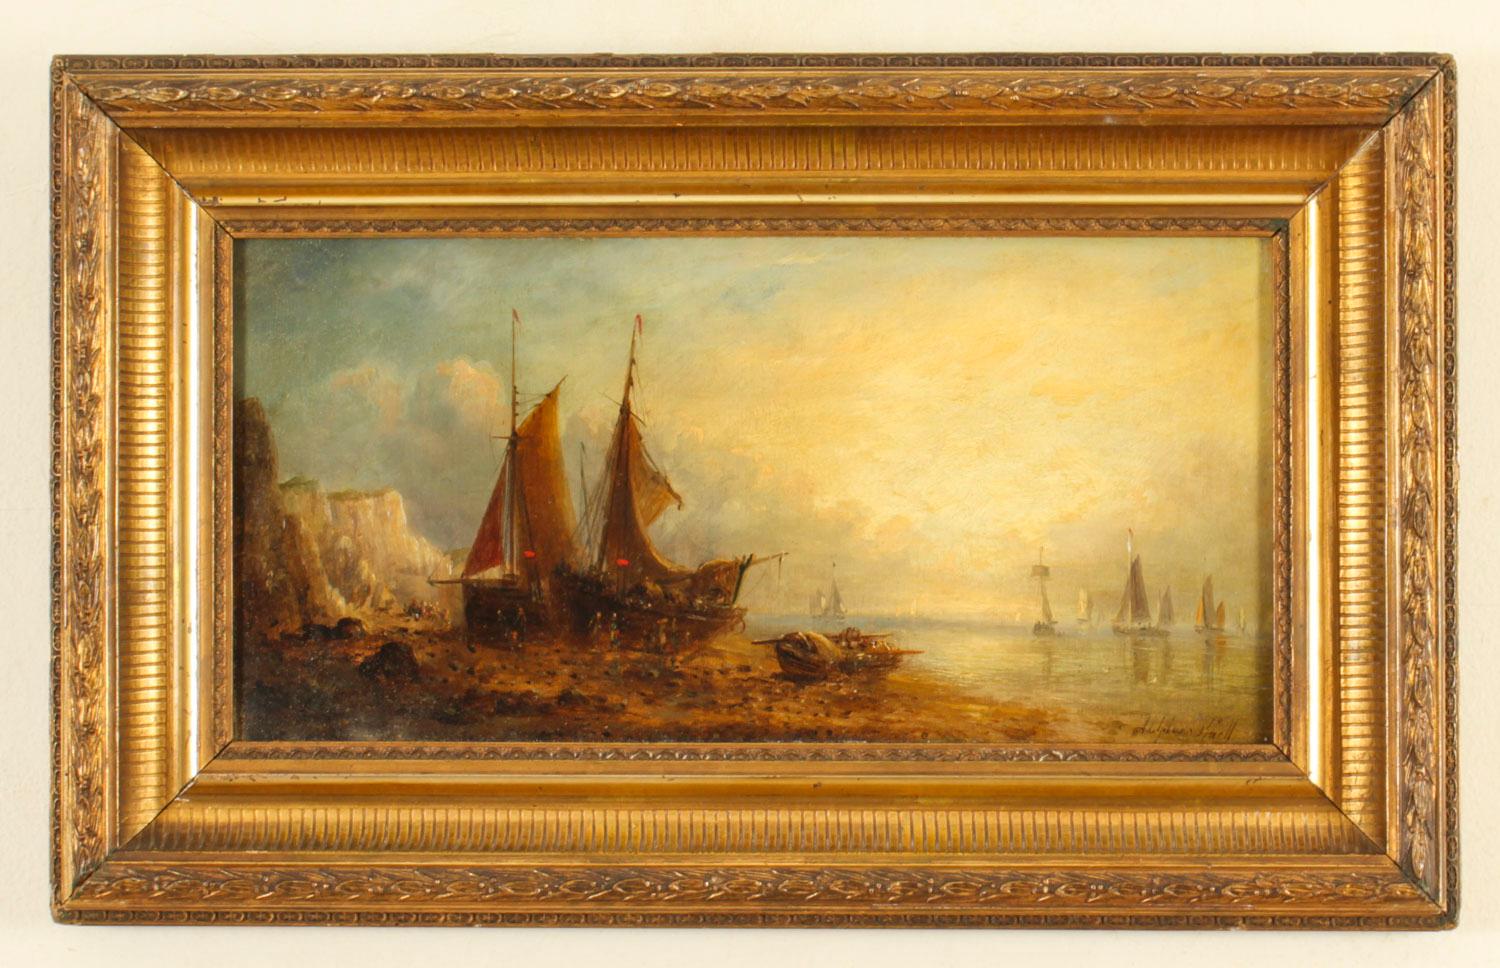 This is a beautiful Dutch pair of antique oil on canvas paintings of marine scenes, by William Adolphus Knell (1805-1875), signed right hand lower corners.

Both paintings depict  rowing and sailing boats at sea, with country folk on the beach